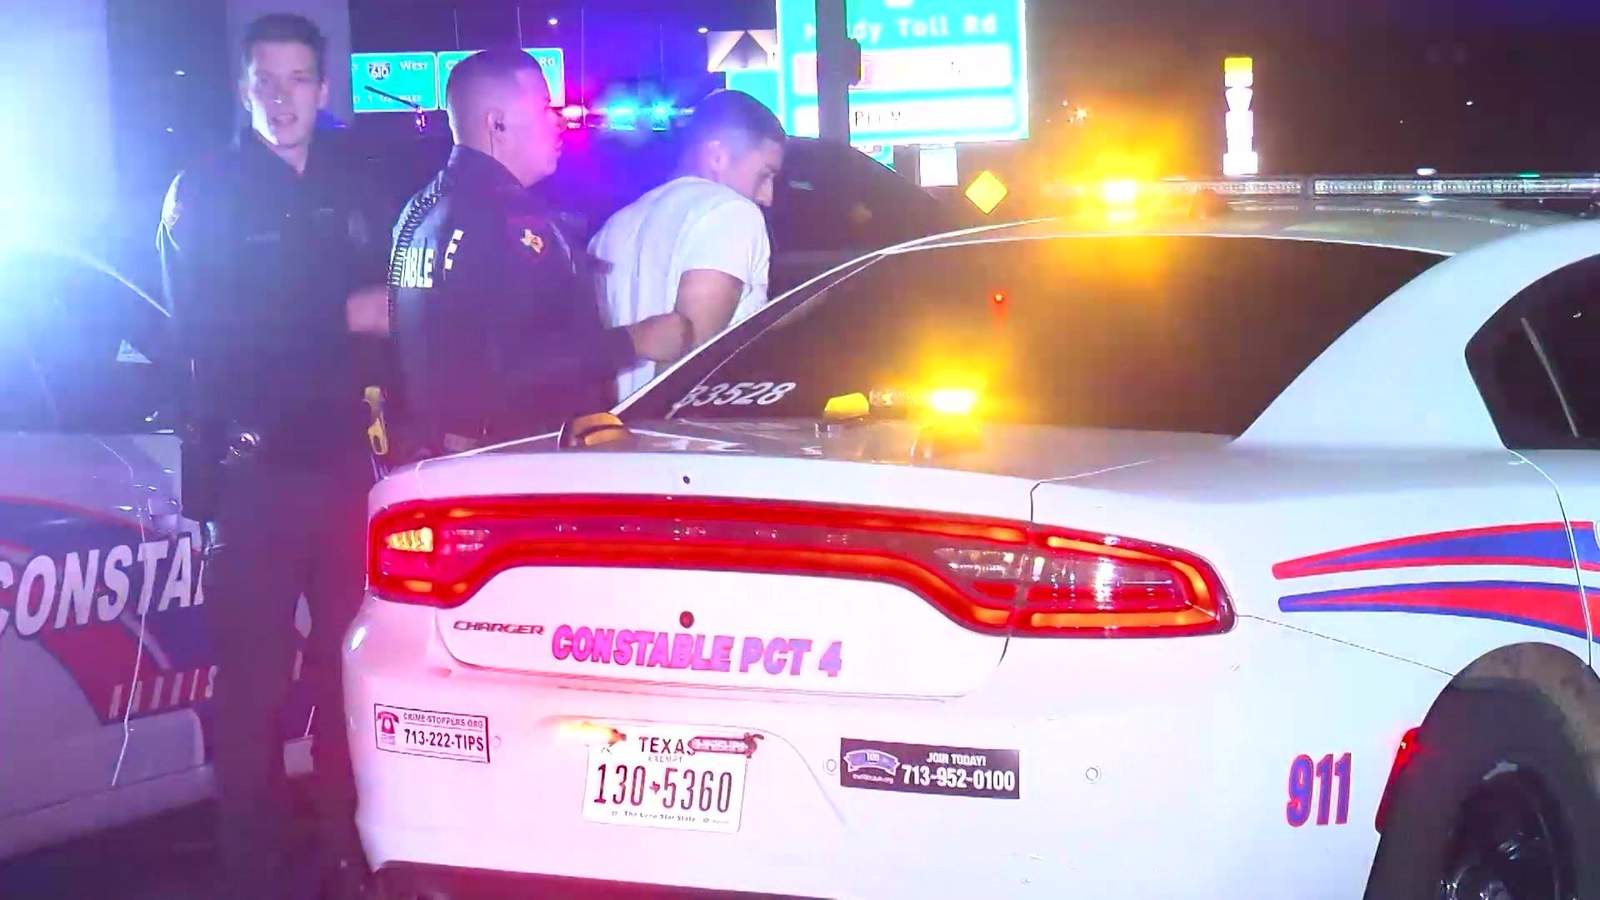 WATCH: 2 arrested after high-speed chase in north Houston